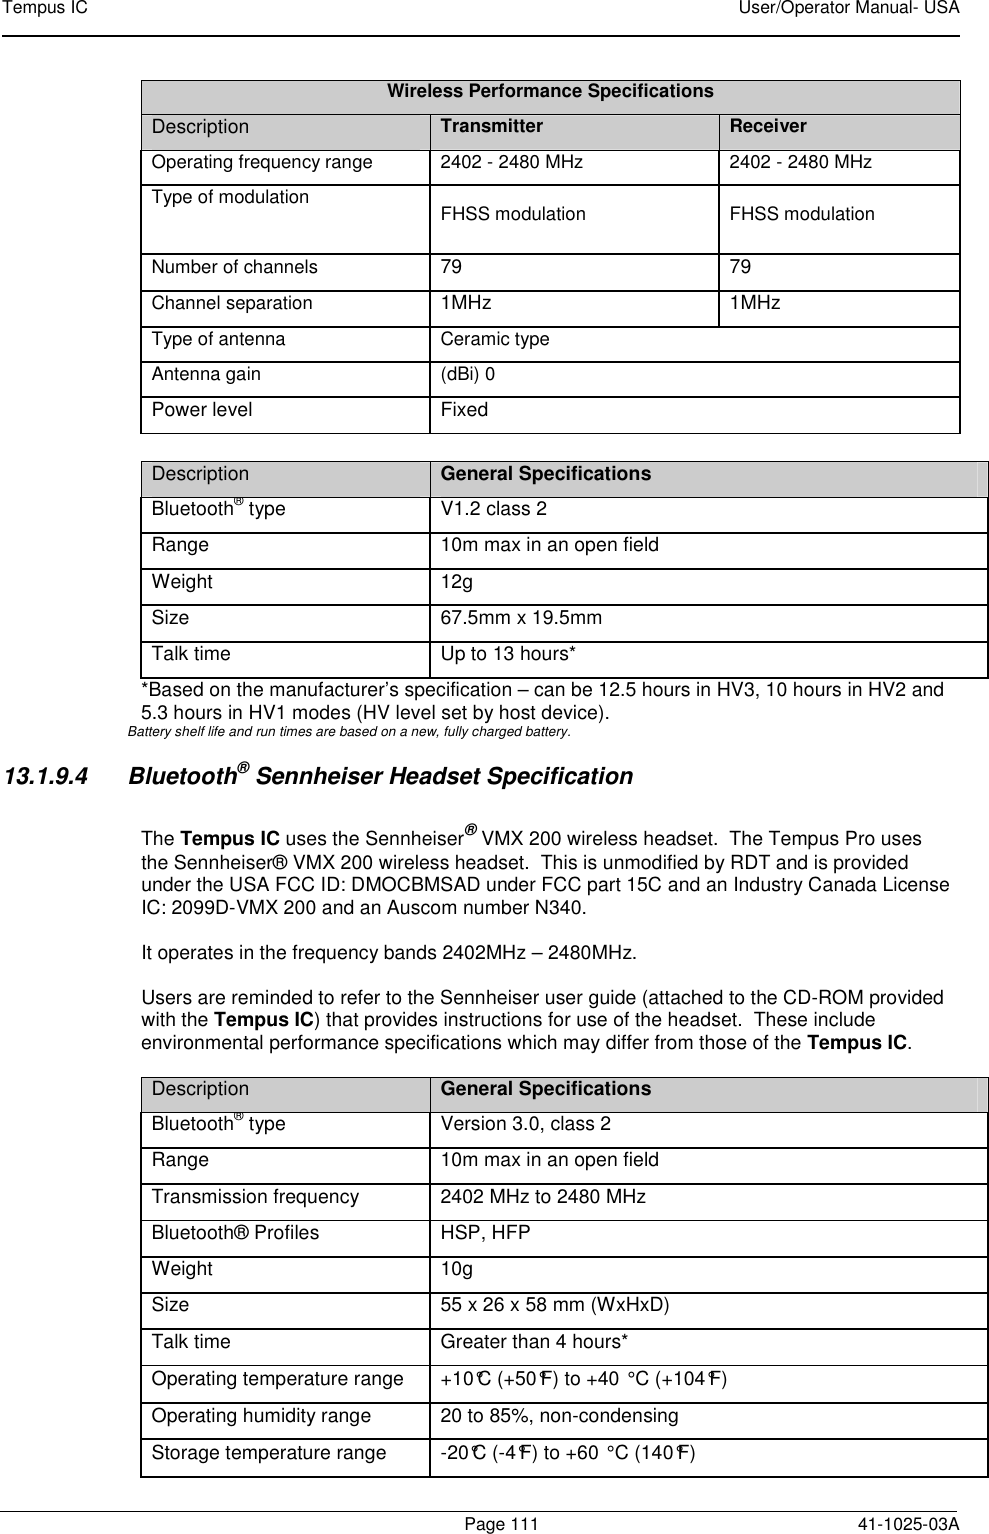 Tempus IC    User/Operator Manual- USA        Page 111   41-1025-03A Wireless Performance Specifications Description Transmitter  Receiver Operating frequency range 2402 - 2480 MHz 2402 - 2480 MHz Type of modulation   FHSS modulation FHSS modulation Number of channels  79  79 Channel separation  1MHz  1MHz Type of antenna Ceramic type Antenna gain  (dBi) 0 Power level  Fixed  Description General Specifications Bluetooth® type  V1.2 class 2 Range  10m max in an open field Weight  12g Size  67.5mm x 19.5mm Talk time   Up to 13 hours* *Based on the manufacturer’s specification – can be 12.5 hours in HV3, 10 hours in HV2 and 5.3 hours in HV1 modes (HV level set by host device). Battery shelf life and run times are based on a new, fully charged battery. 13.1.9.4  Bluetooth® Sennheiser Headset Specification  The Tempus IC uses the Sennheiser® VMX 200 wireless headset.  The Tempus Pro uses the Sennheiser® VMX 200 wireless headset.  This is unmodified by RDT and is provided under the USA FCC ID: DMOCBMSAD under FCC part 15C and an Industry Canada License IC: 2099D-VMX 200 and an Auscom number N340.    It operates in the frequency bands 2402MHz – 2480MHz.  Users are reminded to refer to the Sennheiser user guide (attached to the CD-ROM provided with the Tempus IC) that provides instructions for use of the headset.  These include environmental performance specifications which may differ from those of the Tempus IC.  Description General Specifications Bluetooth® type  Version 3.0, class 2 Range  10m max in an open field Transmission frequency  2402 MHz to 2480 MHz Bluetooth® Profiles  HSP, HFP Weight  10g Size  55 x 26 x 58 mm (WxHxD) Talk time   Greater than 4 hours* Operating temperature range  +10°C (+50°F) to +40°C (+104°F) Operating humidity range  20 to 85%, non-condensing Storage temperature range  -20°C (-4°F) to +60°C (140°F) 